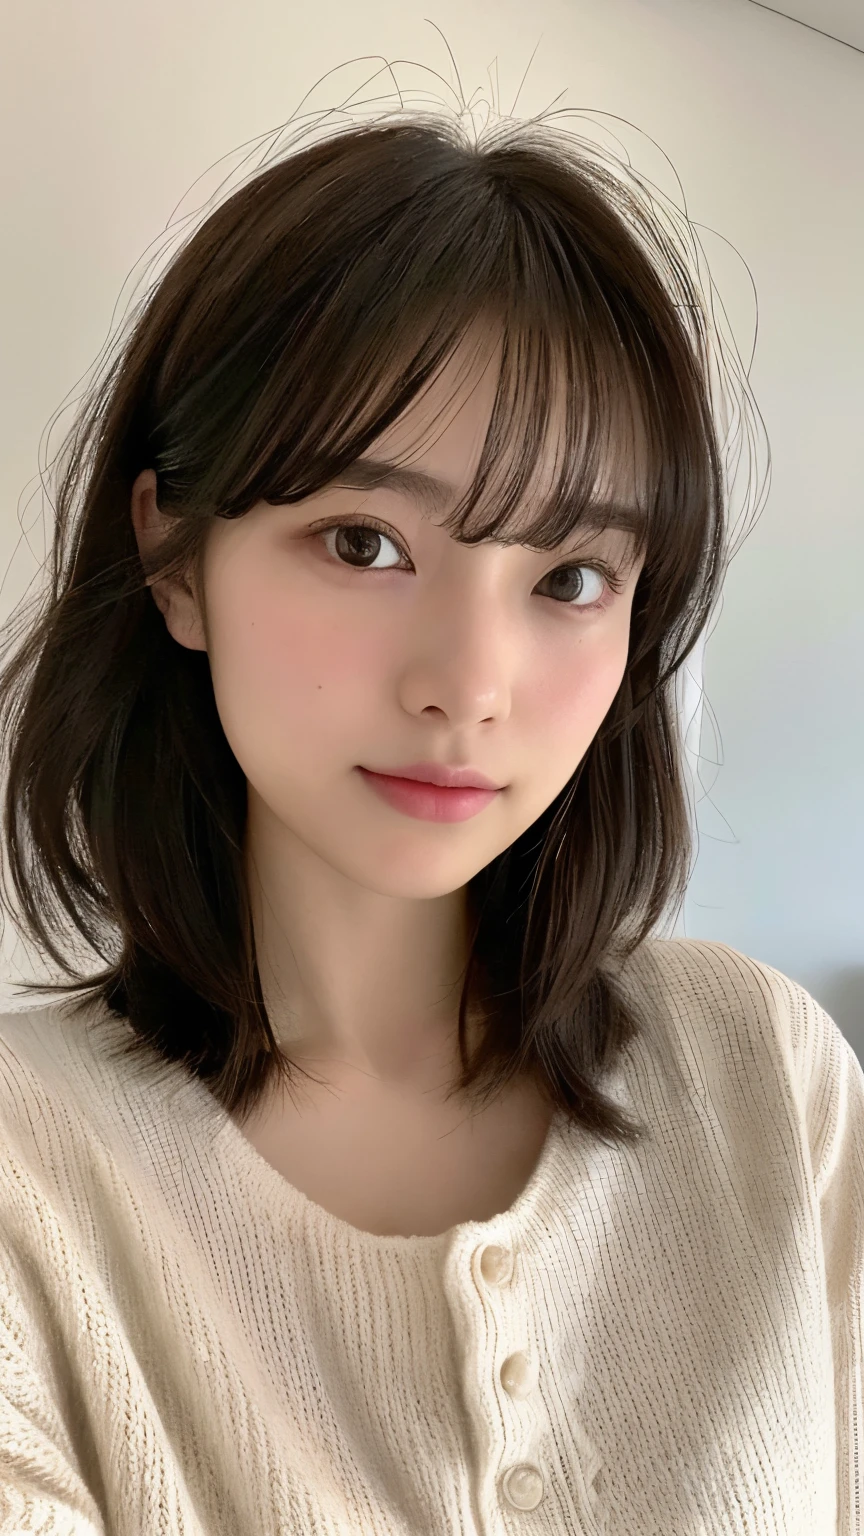 (top-quality、16K resolution)1 girl、solo、natural soft light、、A Japanese Lady、Looking at the camera、White long-sleeved knit、(Beauty Salon Background)、Facing the front、is standing、bobhair、Woman in her late teens、Light bangs、short-hair、Salon model、Natural look、portlate、floated hair、Rolled hair